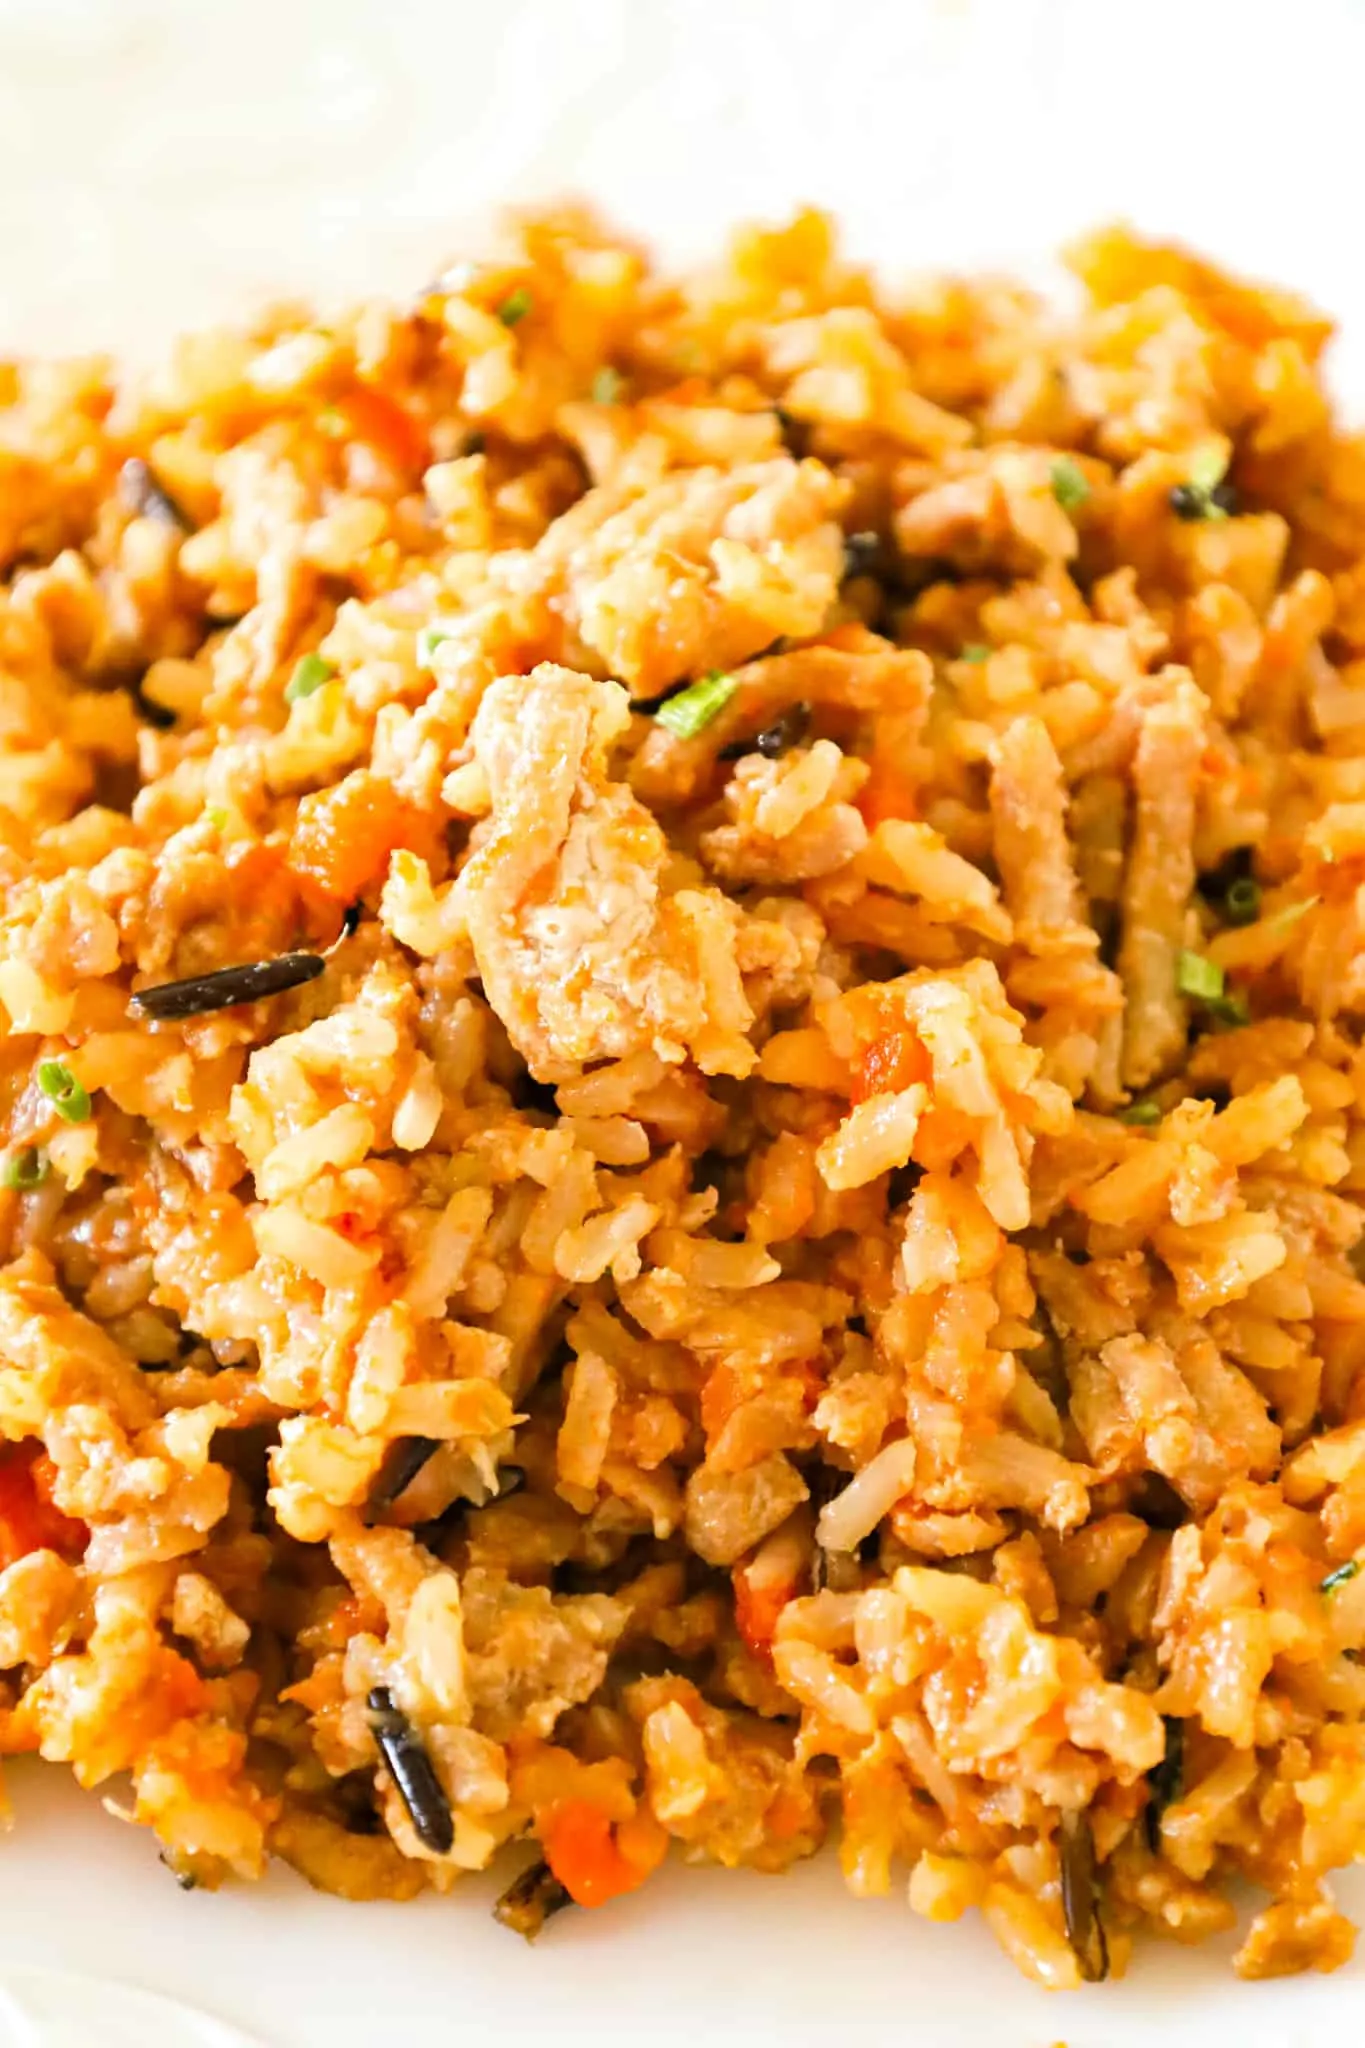 Ground Turkey and Rice is a simple and delicious one pot dinner recipe using brown and wild rice loaded with diced carrots, celery onion and ground turkey cooked in chicken broth and tossed with soy sauce.